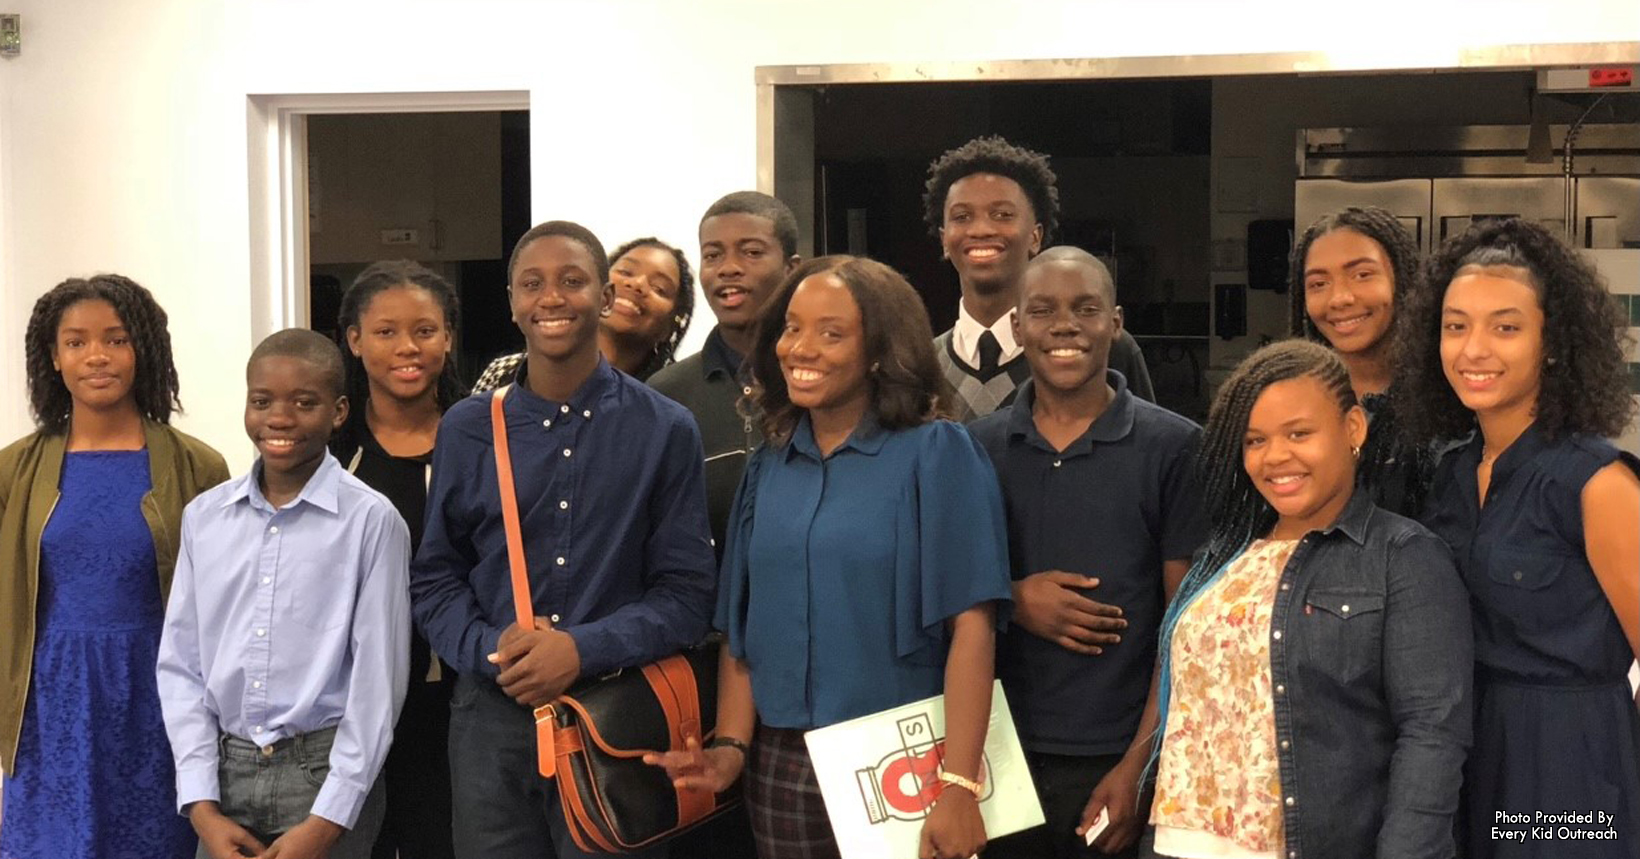 Lashea Reeves (centered) after teaching a financial literacy course to students of EKO's leadership program at Maitland Presbyterian Church.